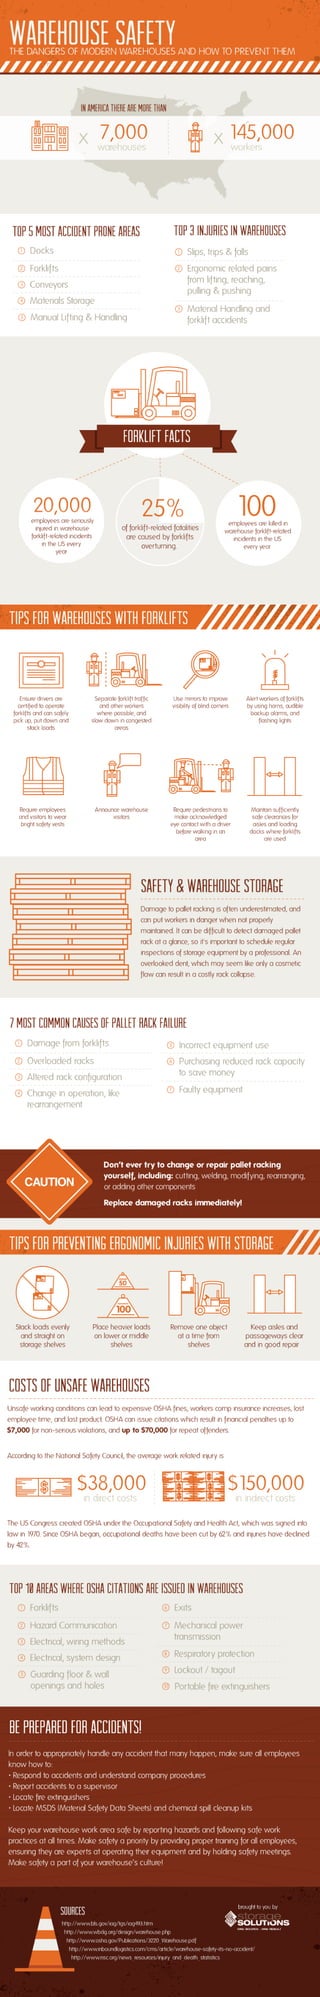 Warehousing Safety by Storage Solutions